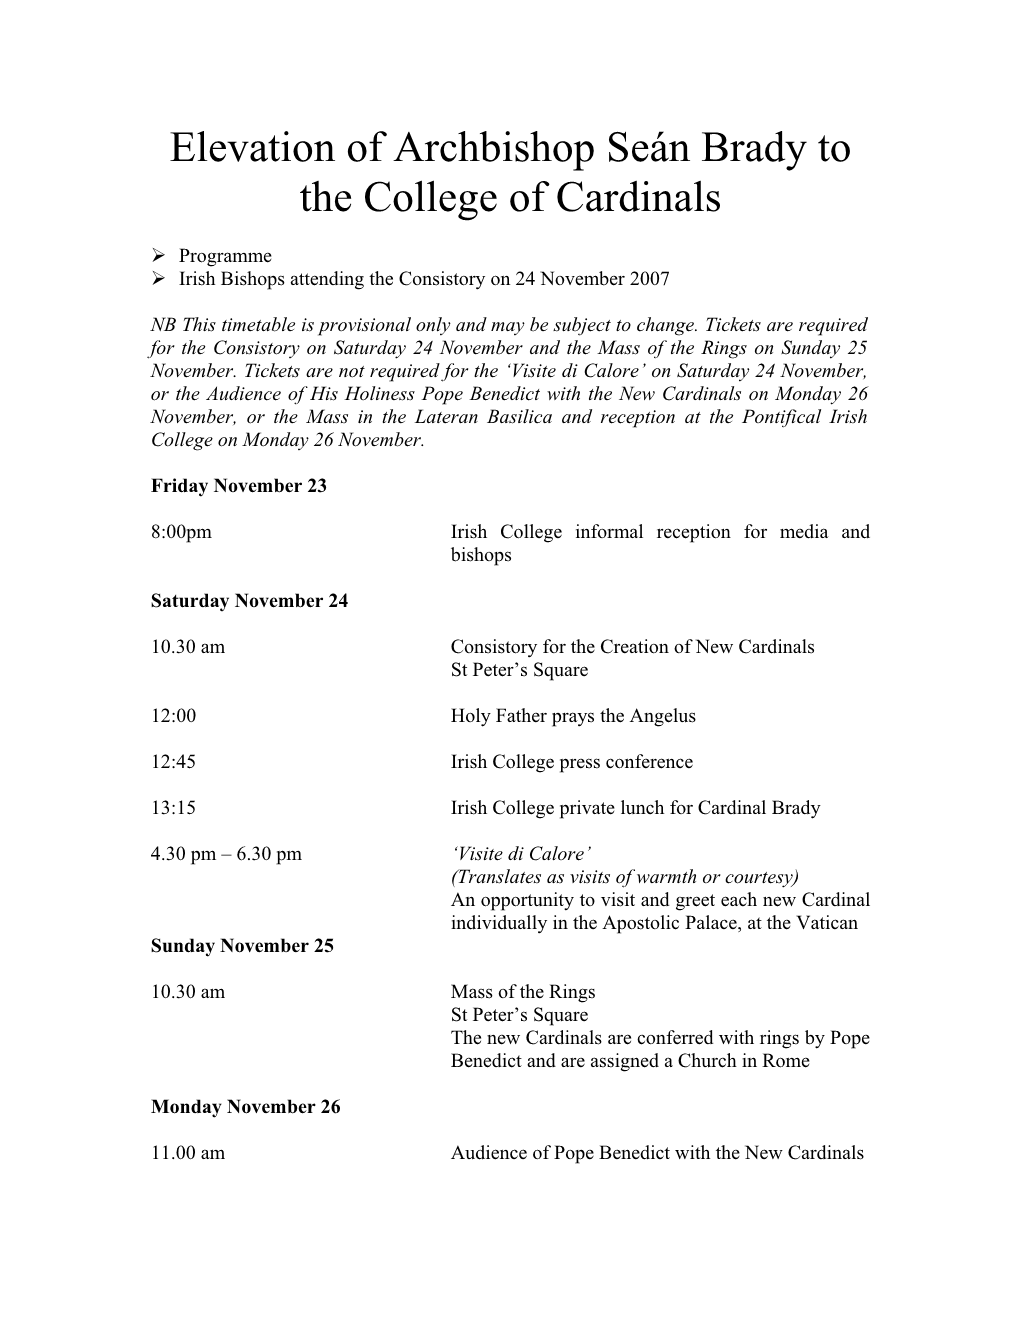 Elevation of Archbishop Seán Brady to the College of Cardinals